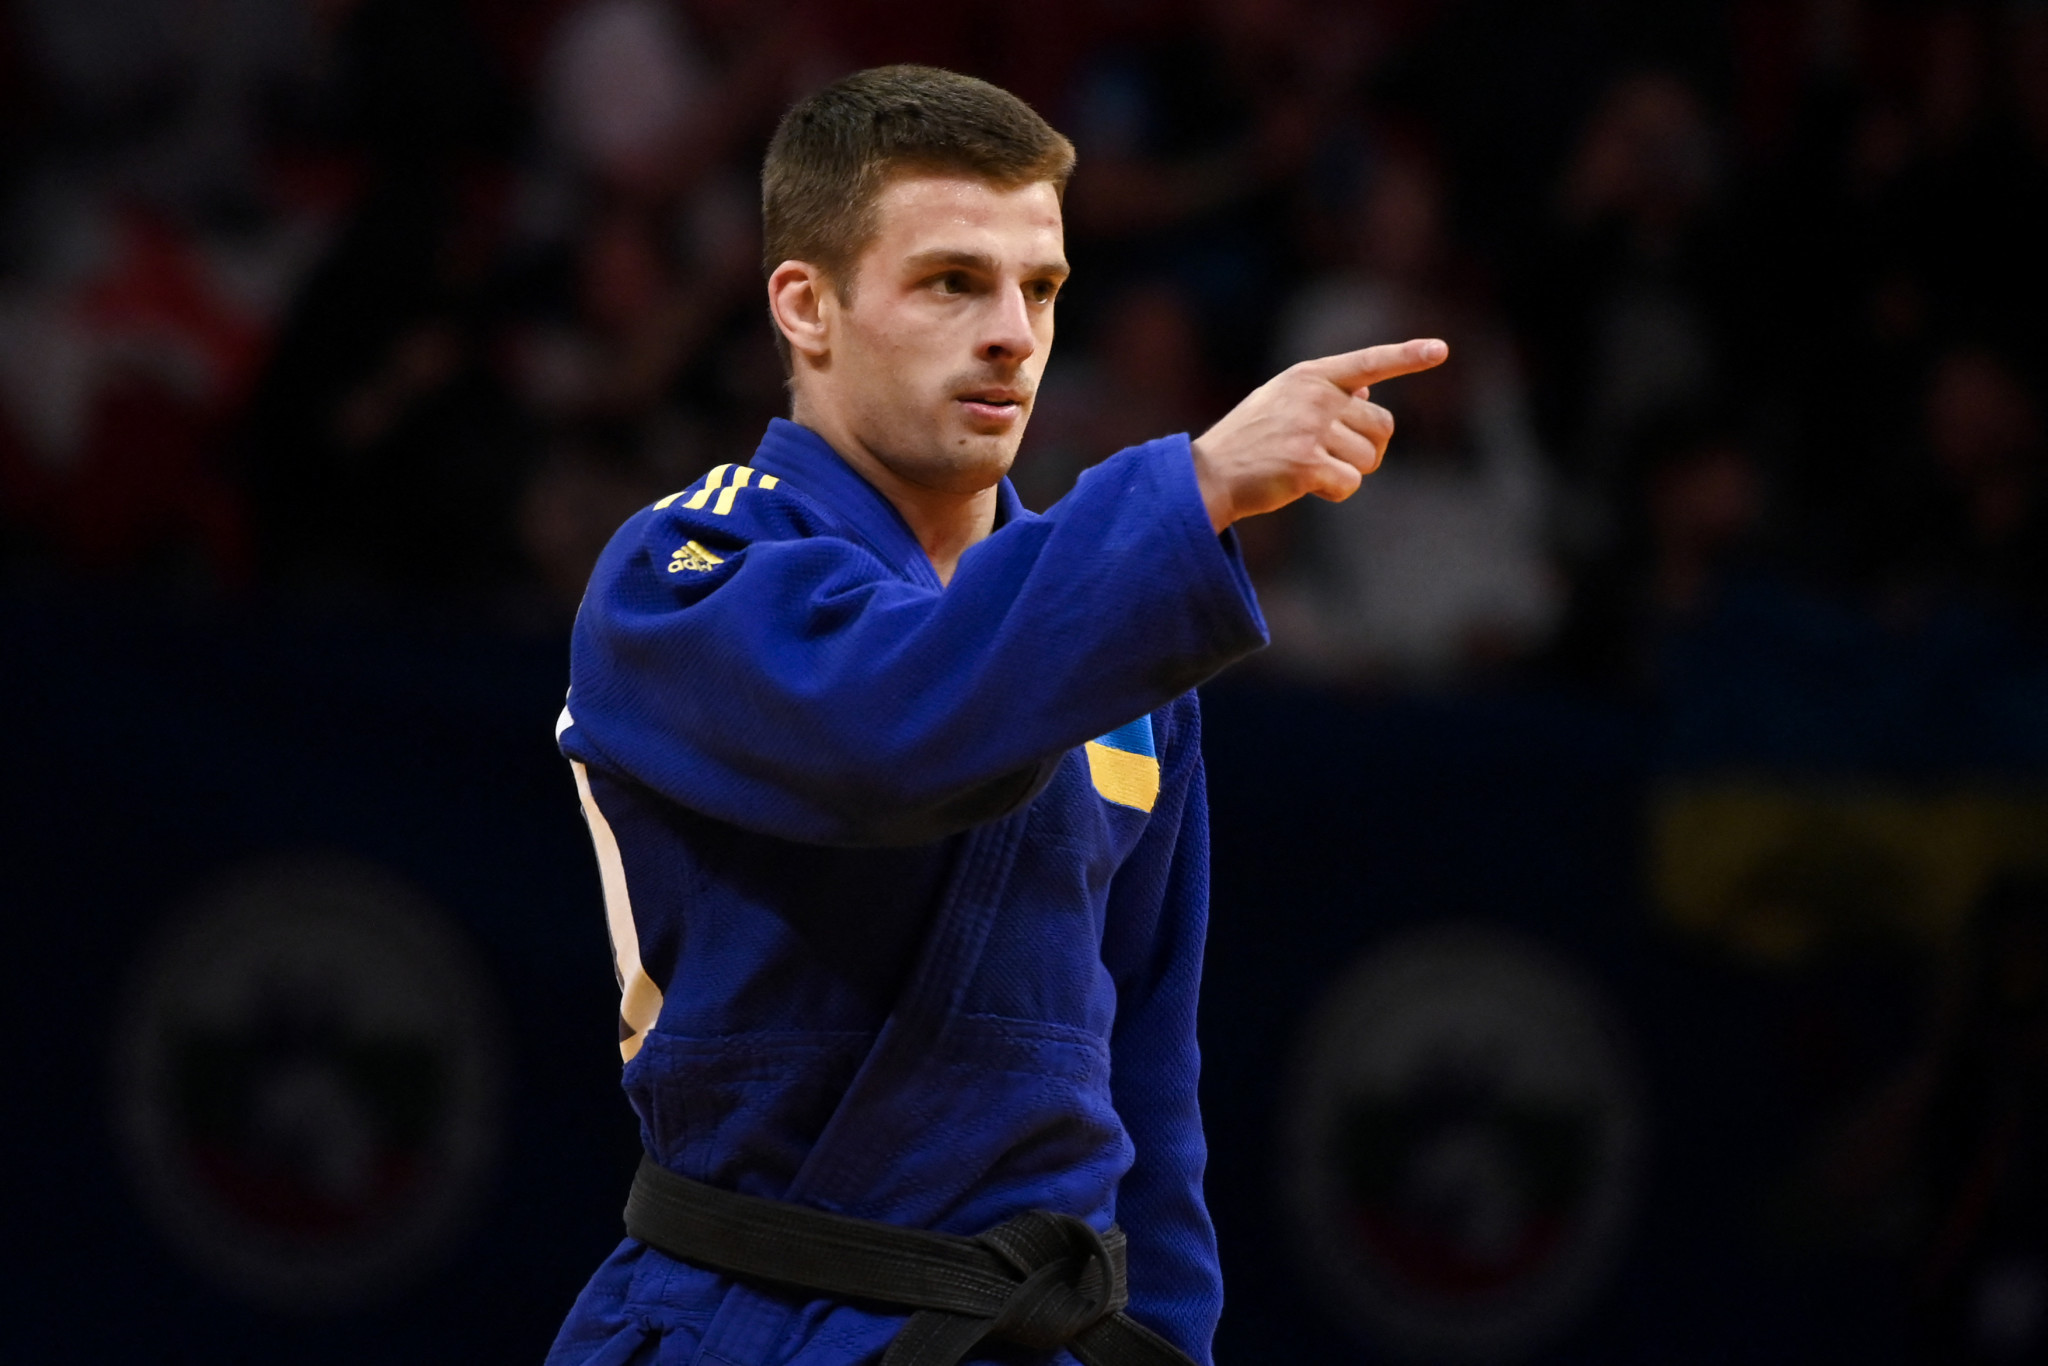 The Ukrainian Judo Federation has said it will "refuse to participate" at all events attended by Russian and Belarusian athletes competing as neutrals ©Getty Images